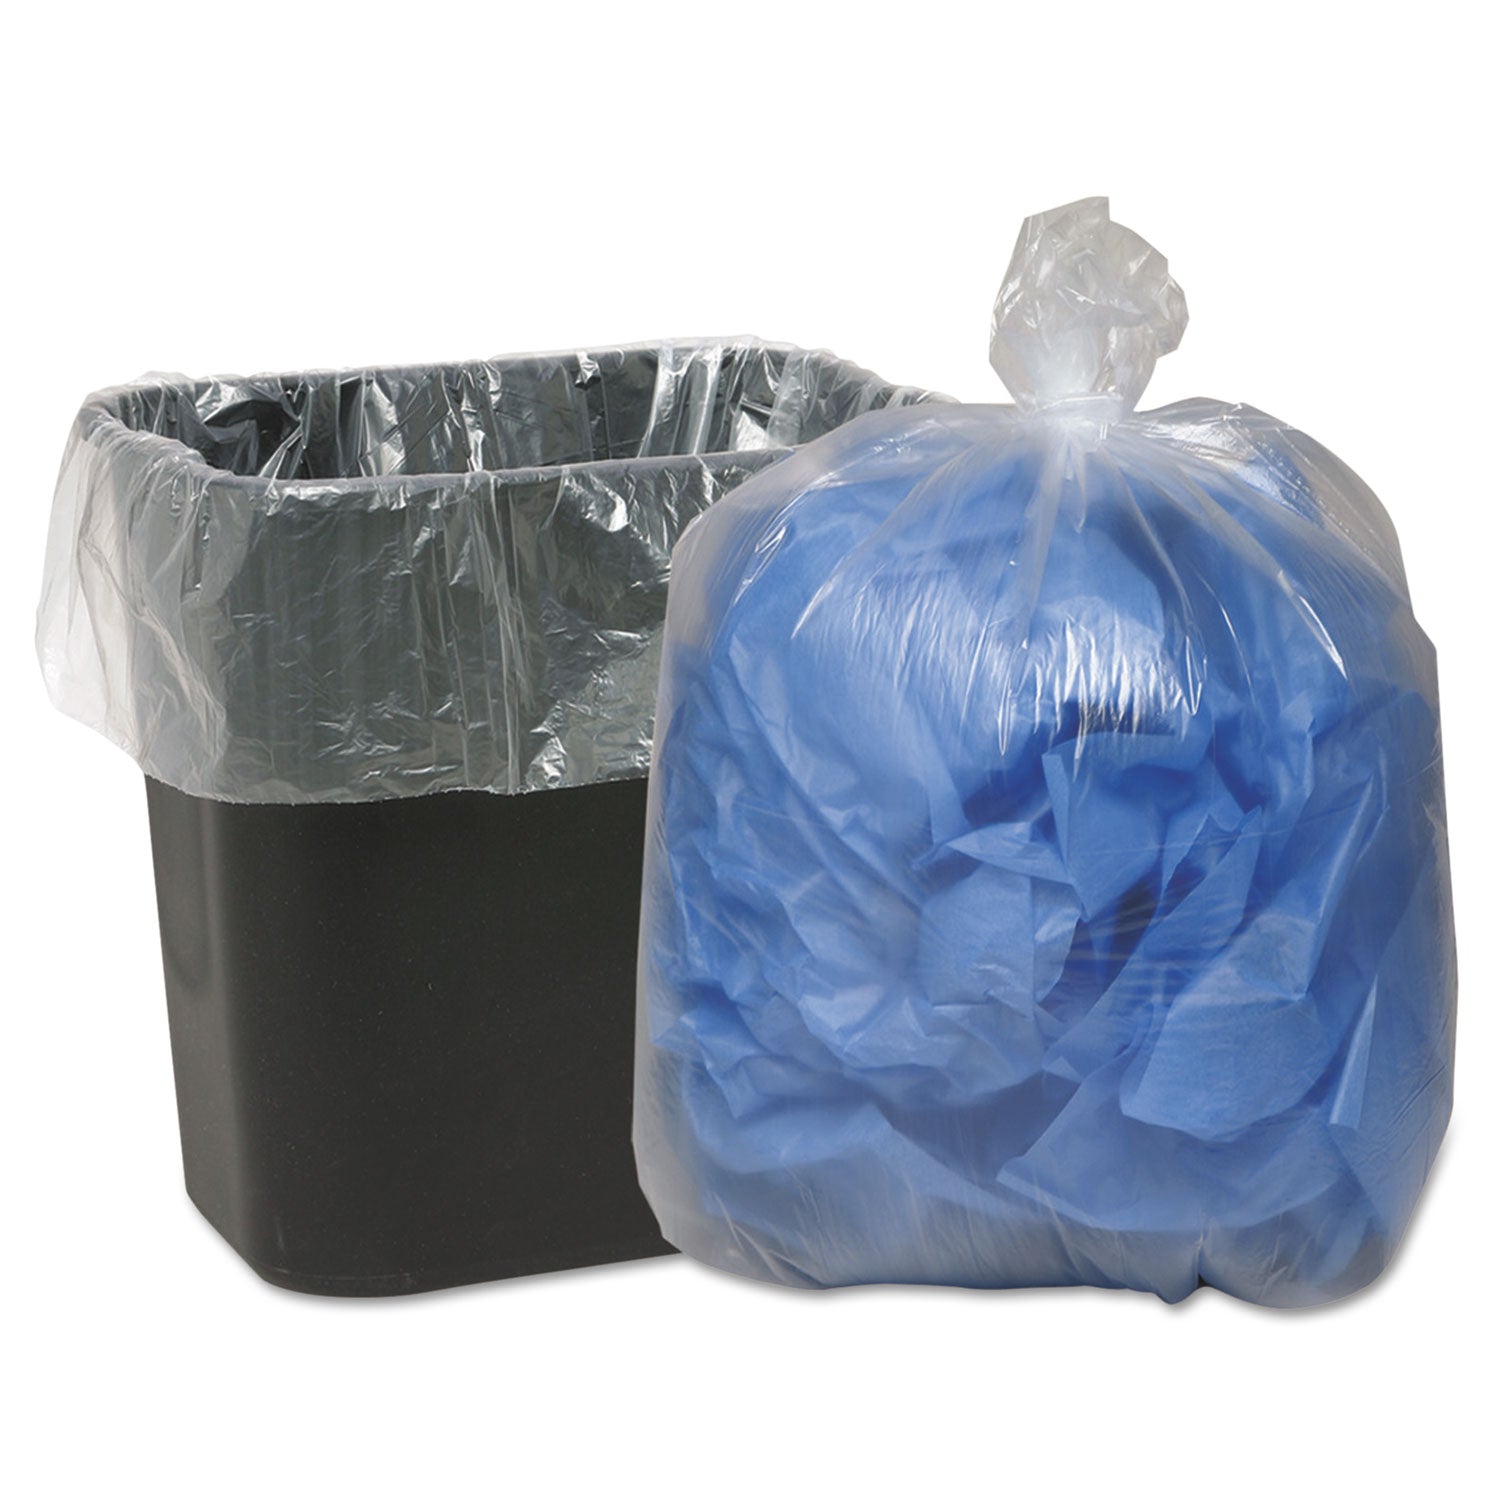 linear-low-density-can-liners-16-gal-06-mil-24-x-33-clear-25-bags-roll-20-rolls-carton_wbi243115c - 1